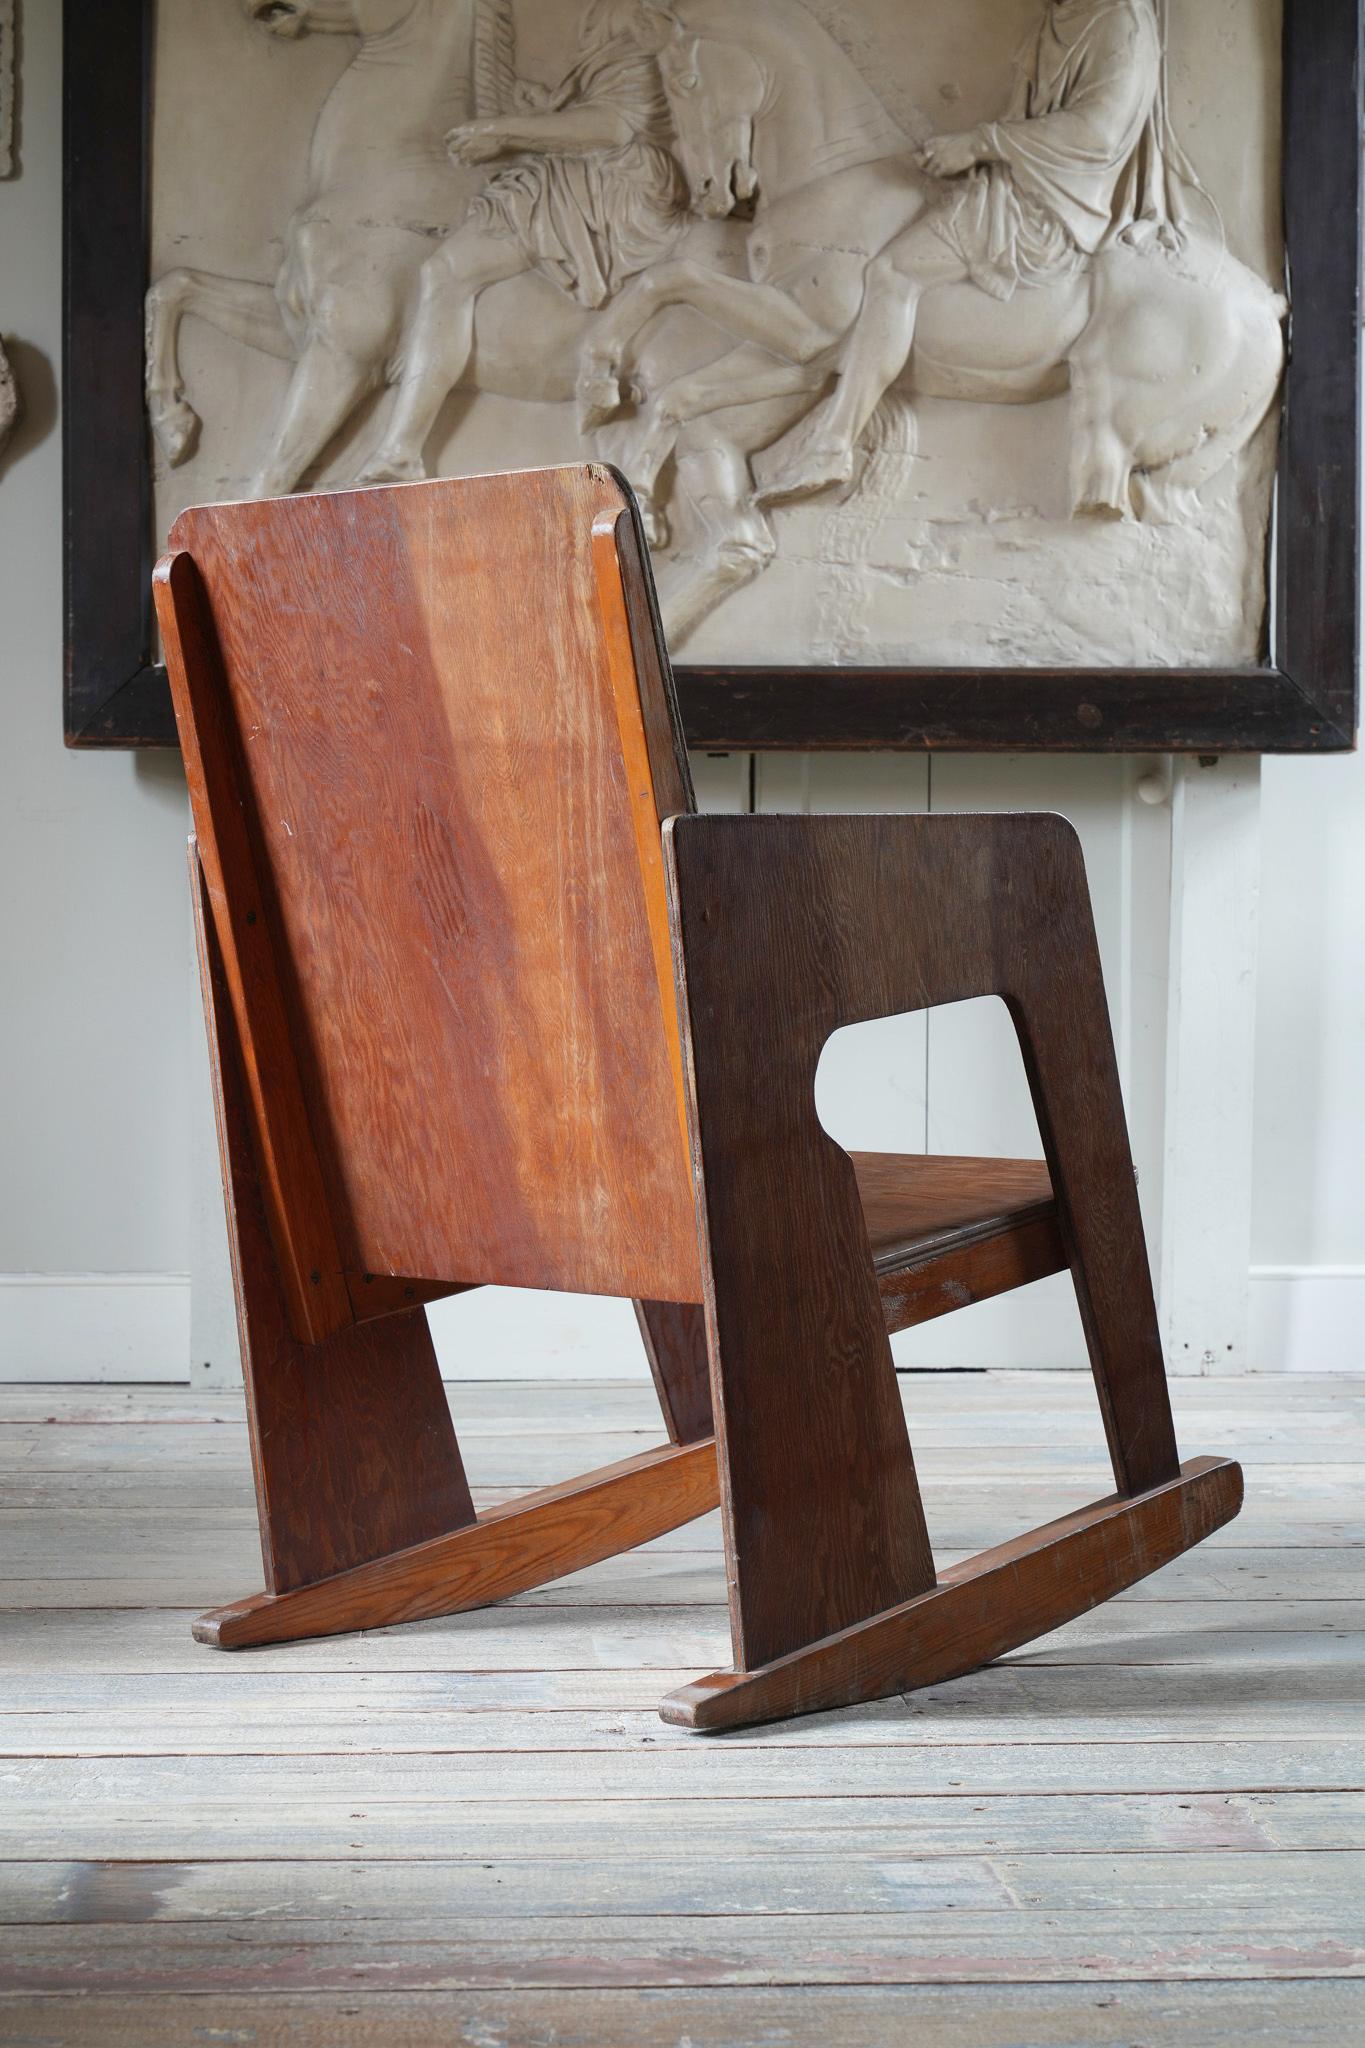 Dry untreated plywood and pine.

Unknown maker but clearly influenced by the work of Axel Einar Hjoth, Alvar Aalto, Gerald Summers and Marcel Breuer.

Anon, 1930s. 